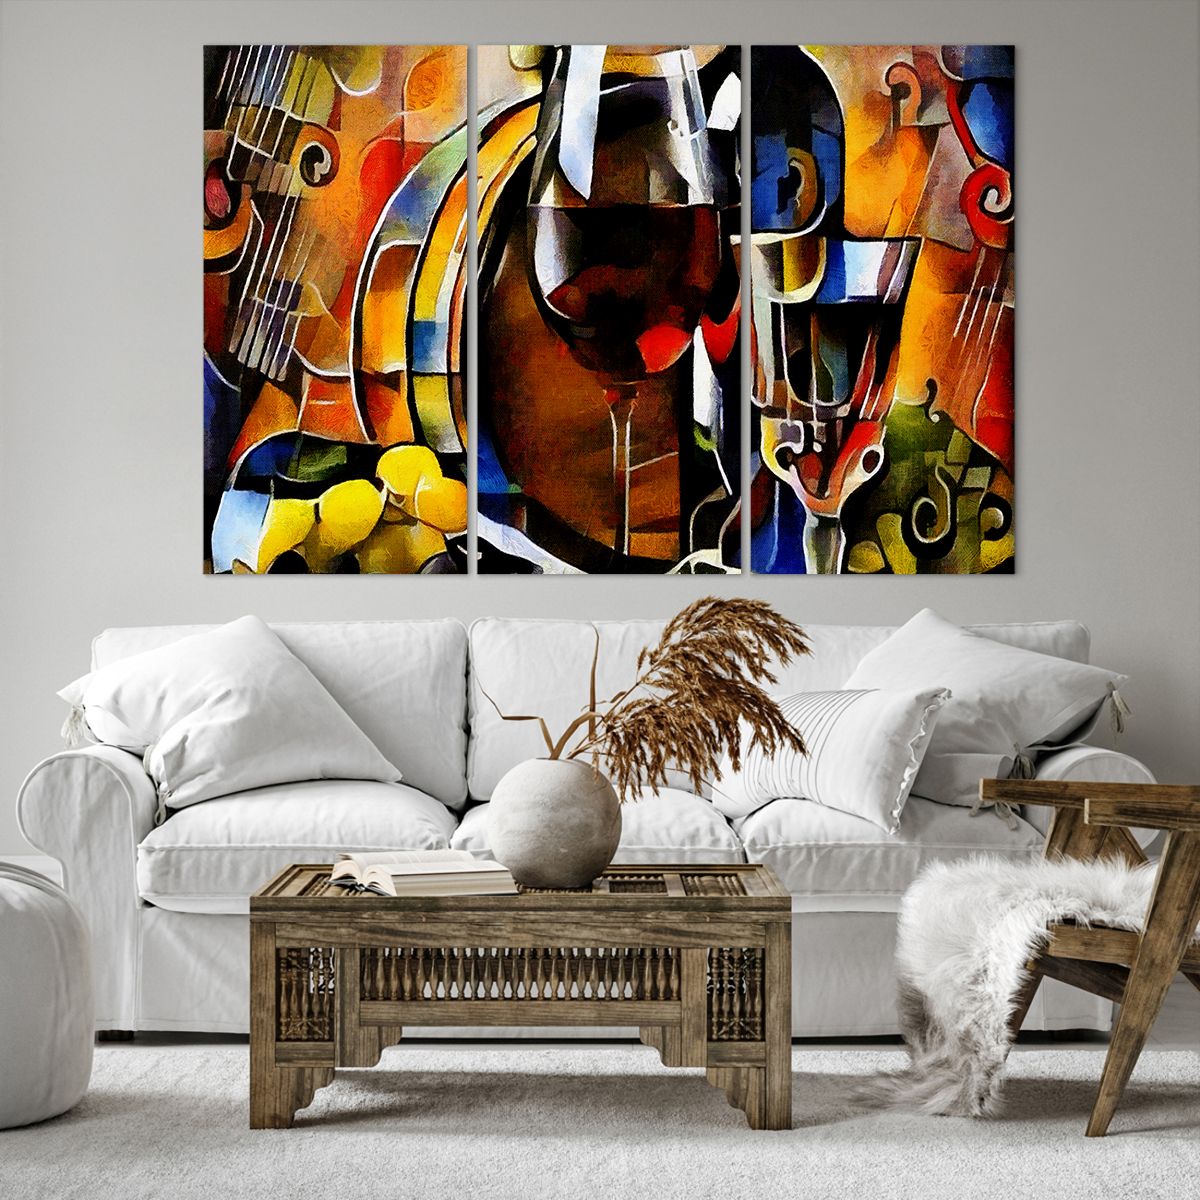 Impression sur toile Abstraction, Impression sur toile Cubisme, Impression sur toile Art, Impression sur toile Vin, Impression sur toile Violon